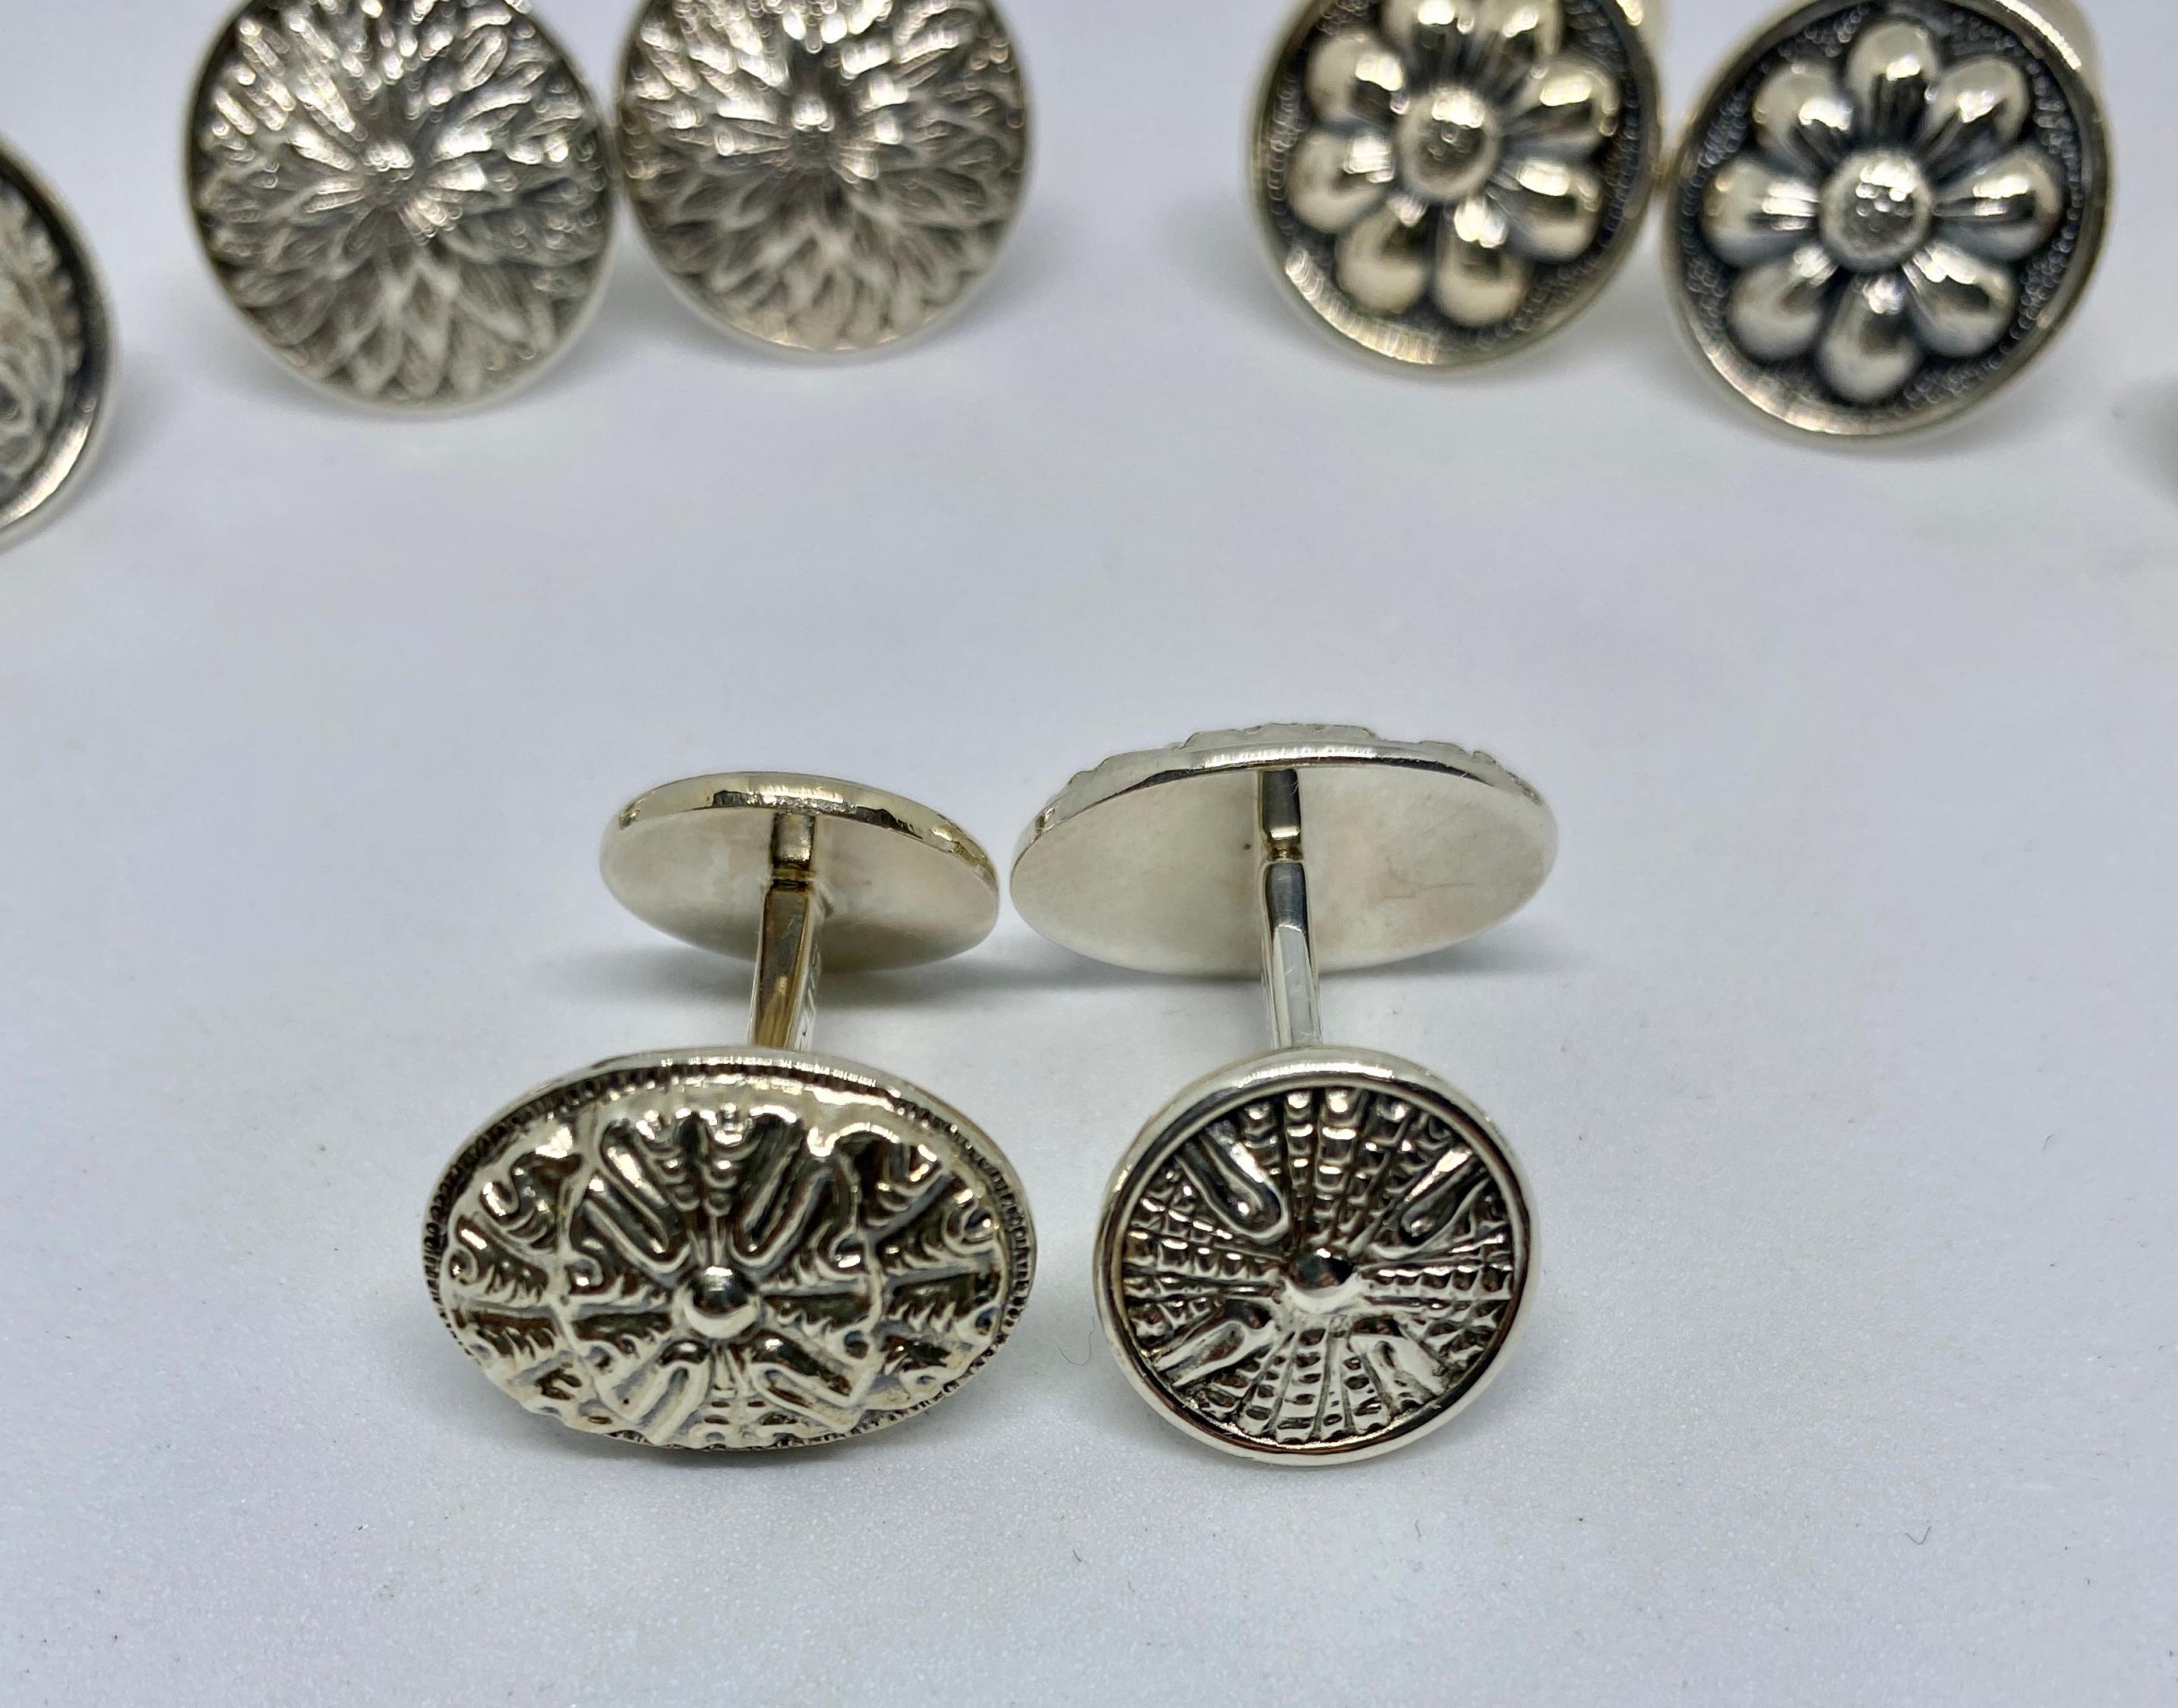 Five pairs of double-sided cufflinks in sterling silver by Gianmaria Buccellati.

Each pair has a face that's approximately 18mm in diameter and a back that's approximately 13mm in diameter. One of the five pairs has oval-shaped faces of roughly the